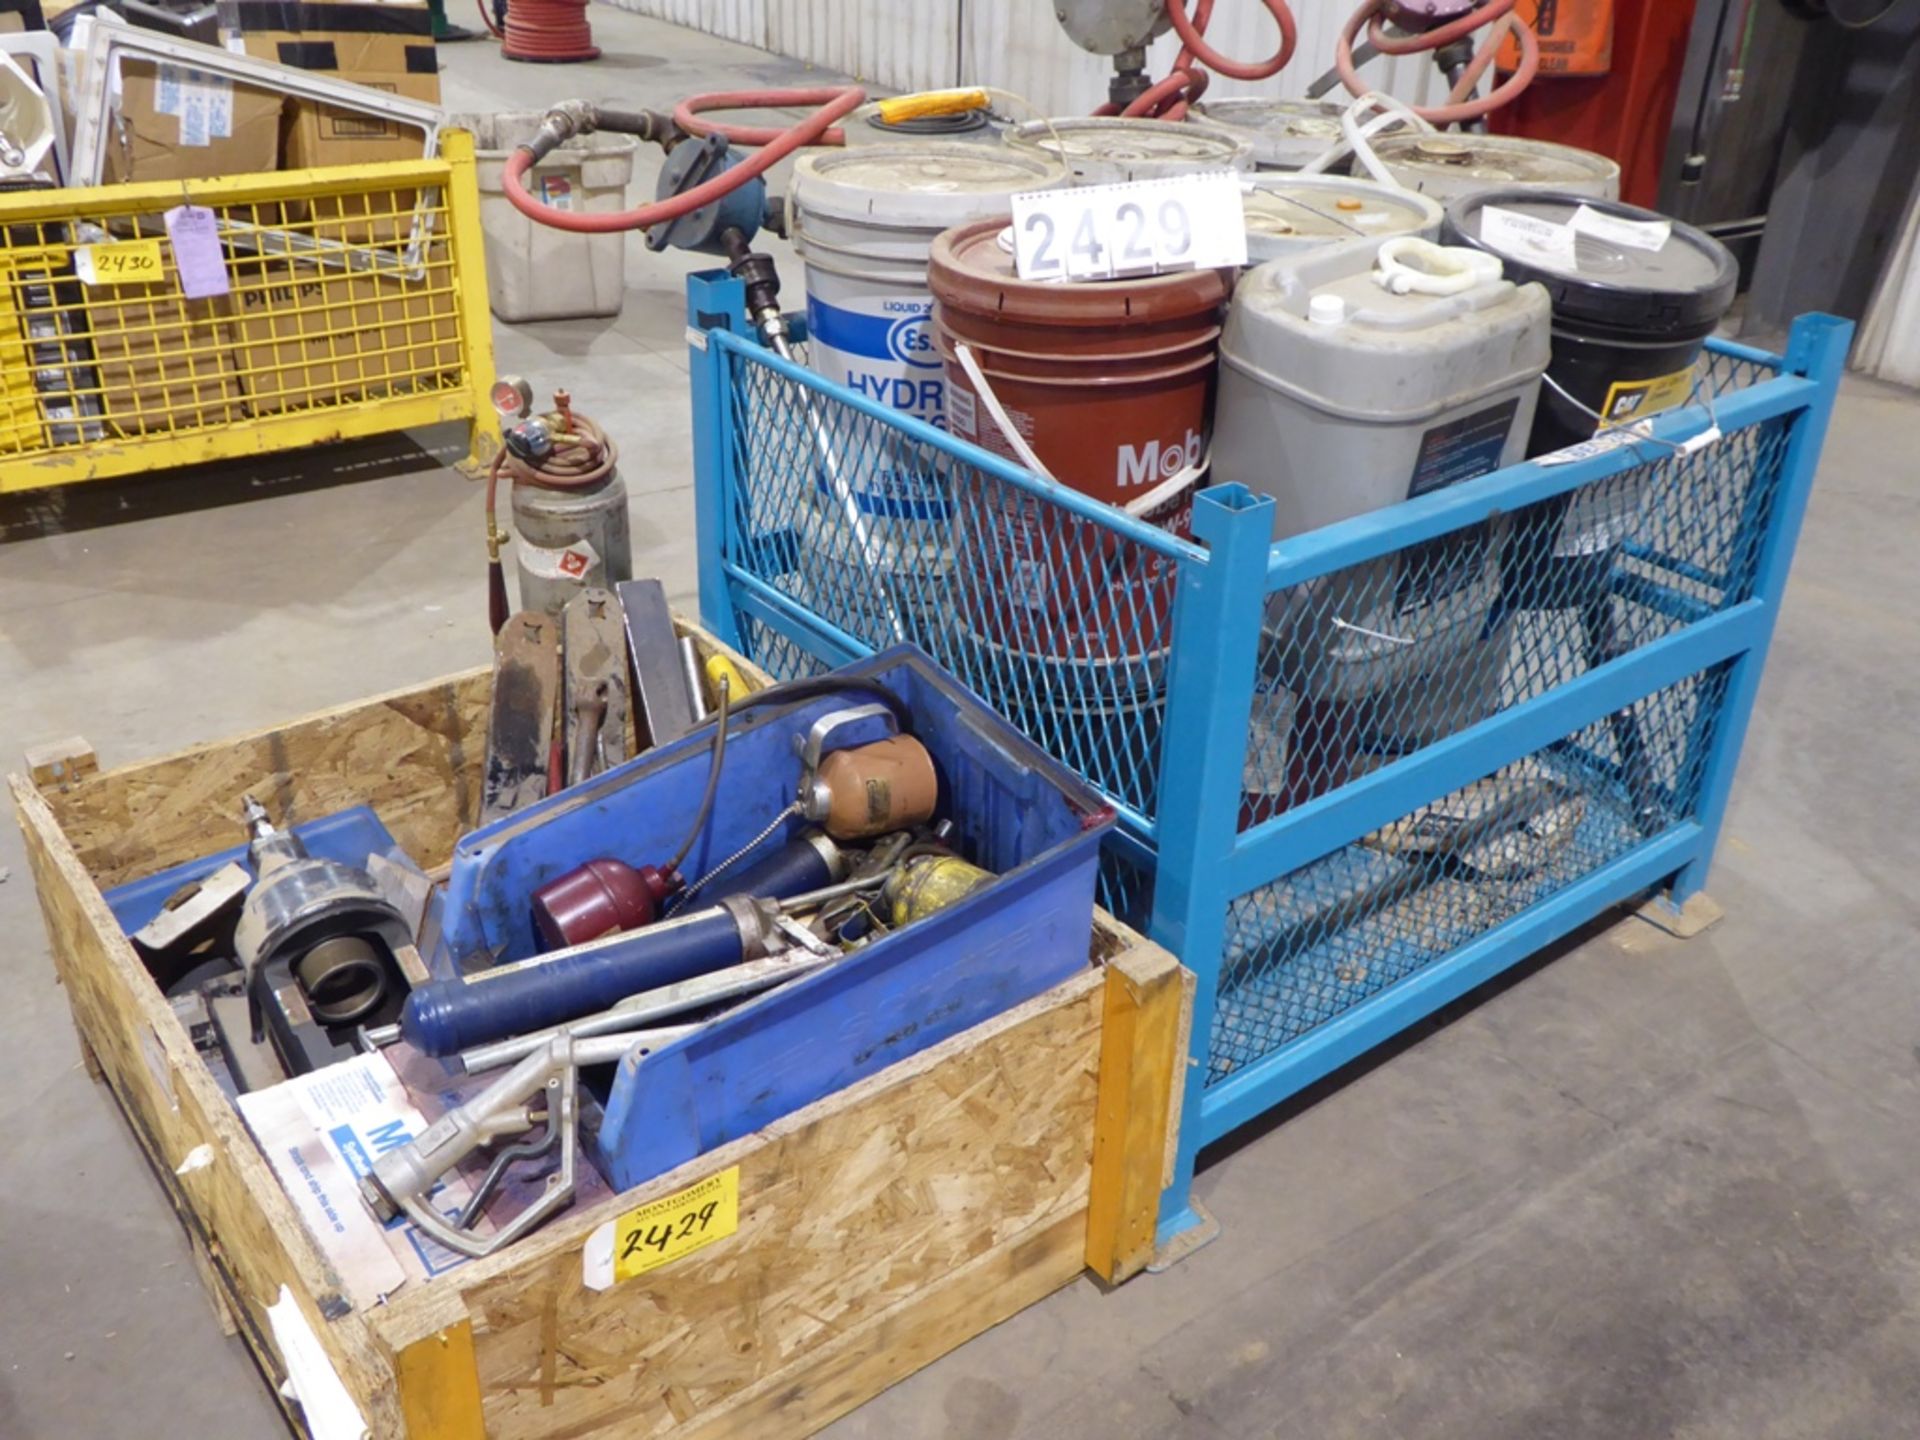 2 CRATES OF OIL, TRANSFER PUMPS, PLUMBERS TORCH, GREASE GUNS & GREASE, LINCOLN ELECTRIC TRANSFER - Image 2 of 3